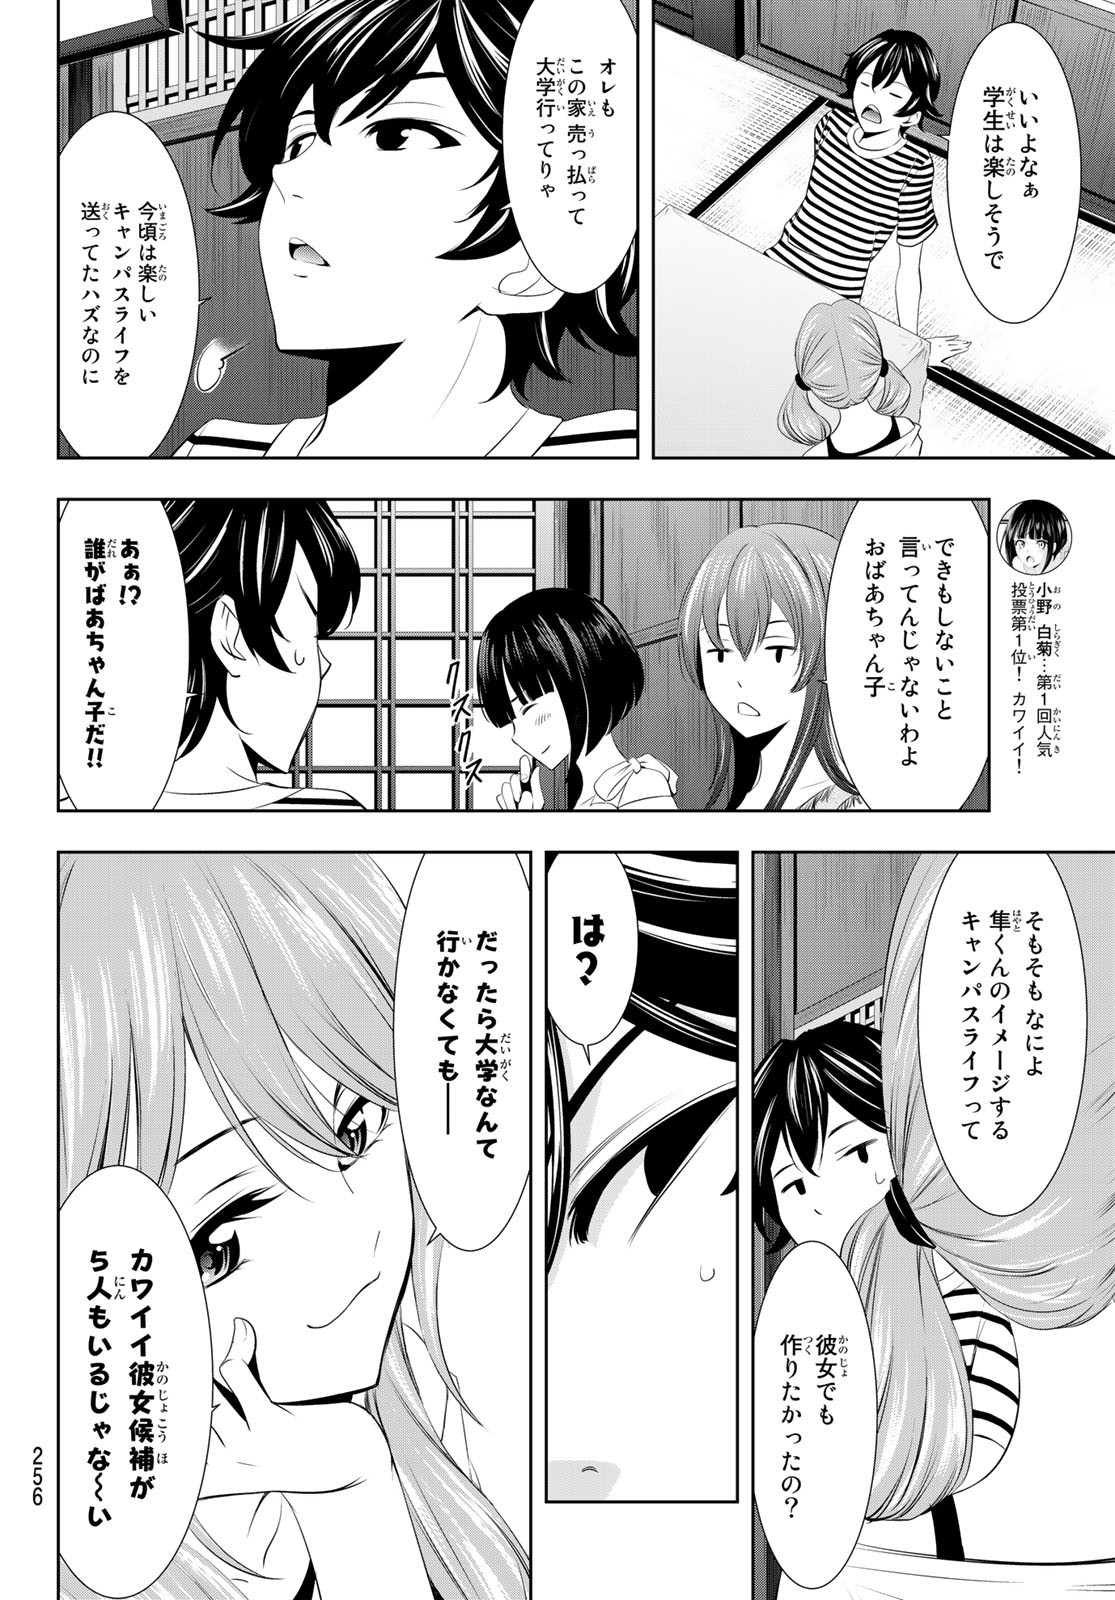 Megami no Cafe Terace - Chapter 21 - Page 2